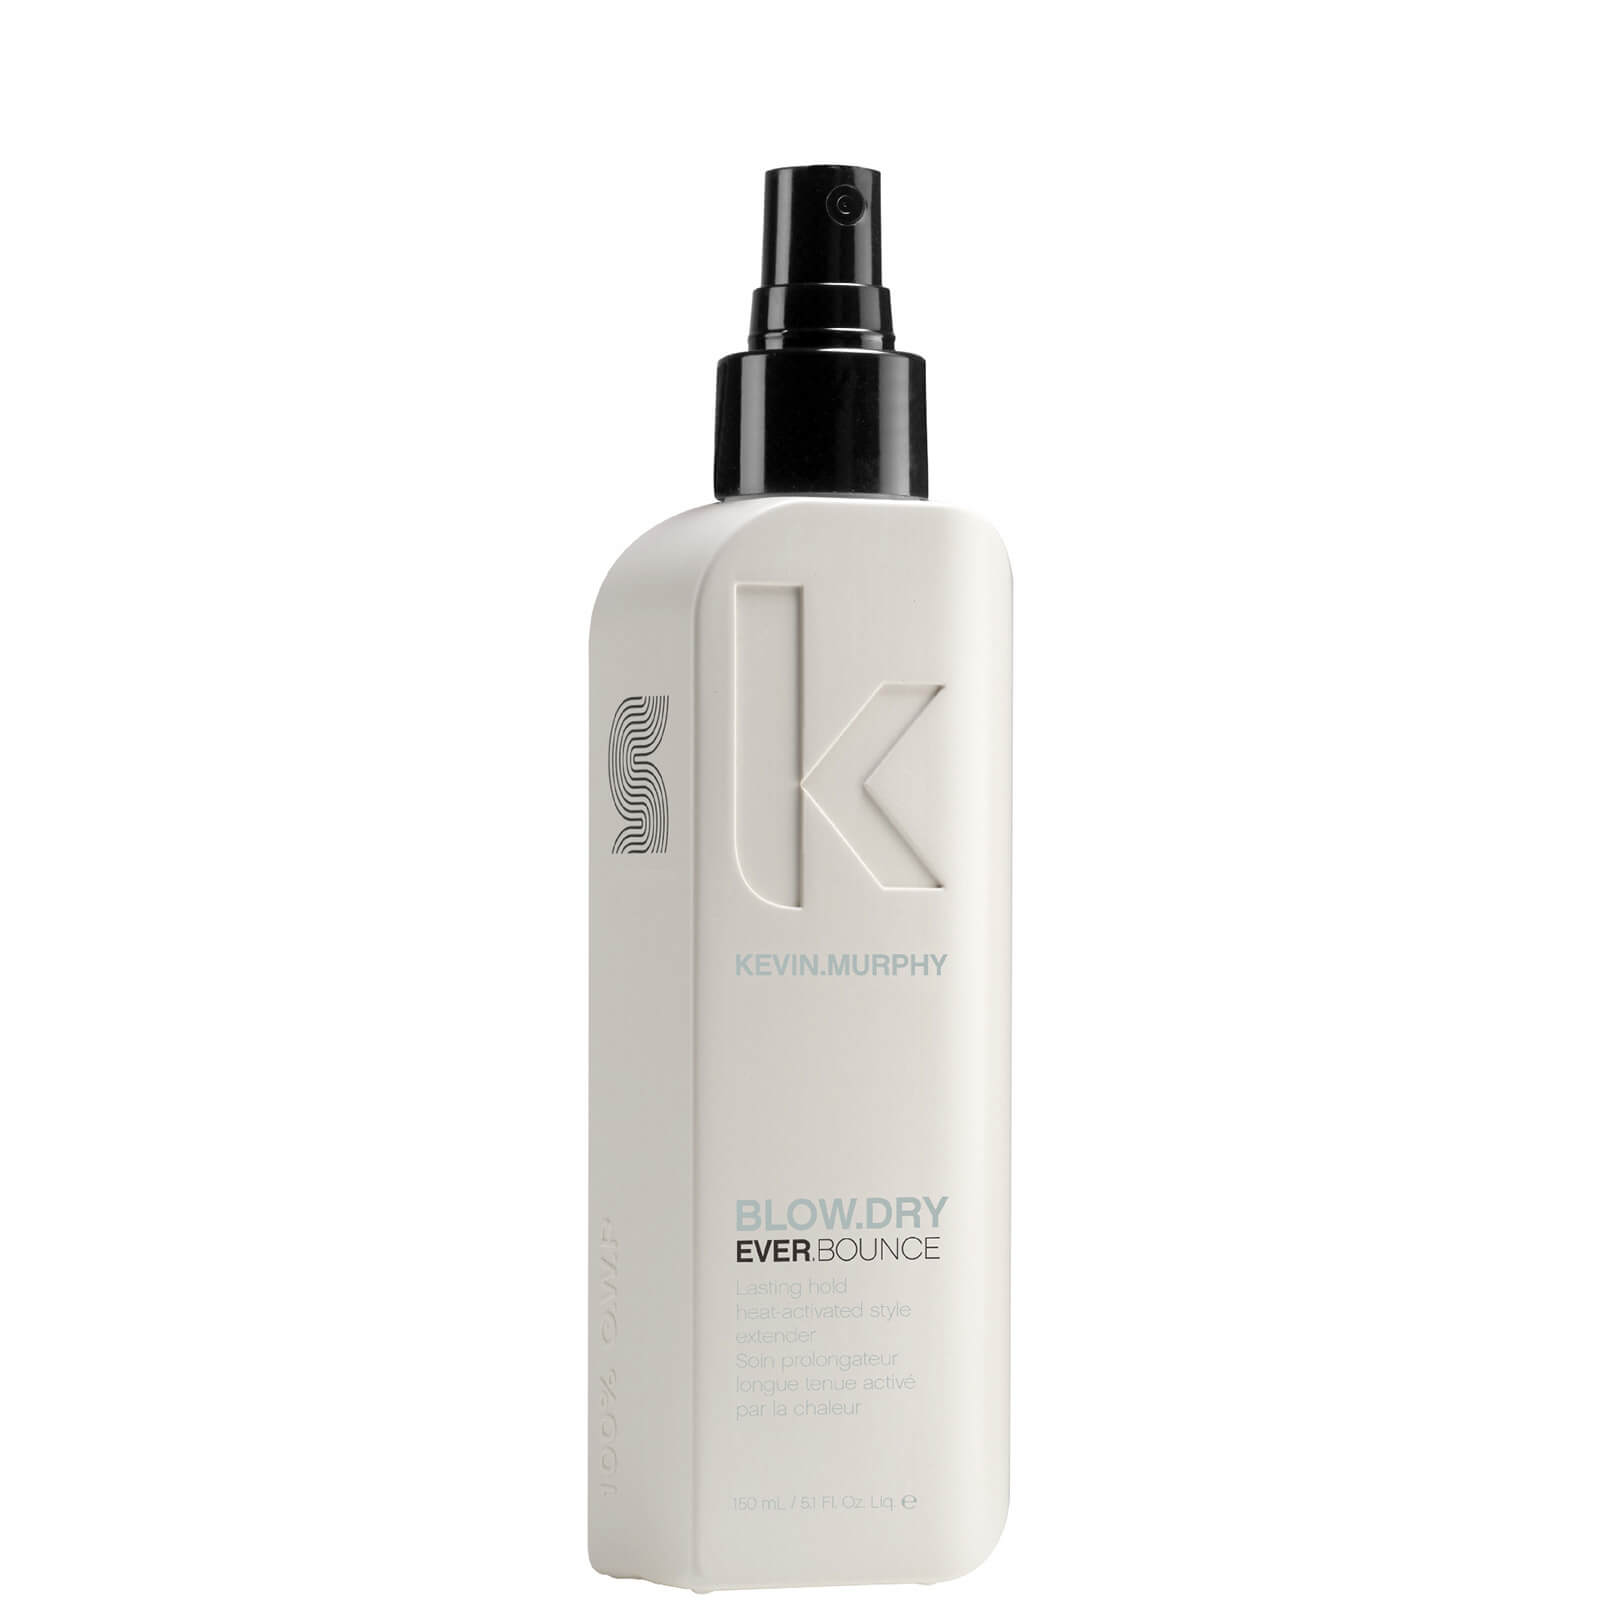 Kevin Murphy Kevin.murphy Blow.dry Ever.bounce